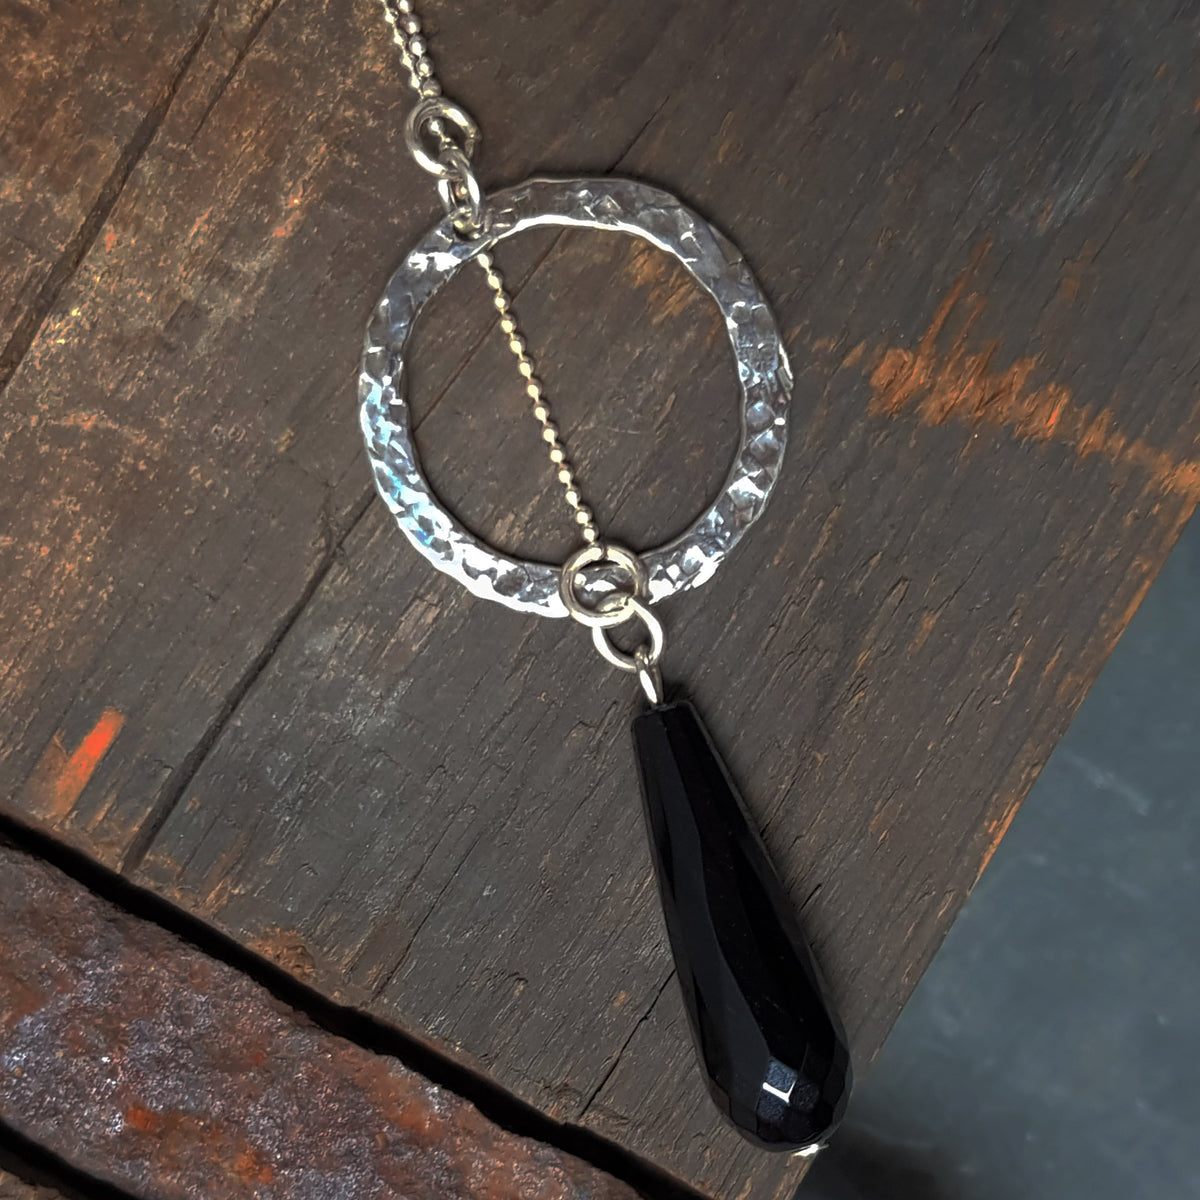 facetted onyx necklace with hammered silver pendant on fine silver ball chain, handmade by roff